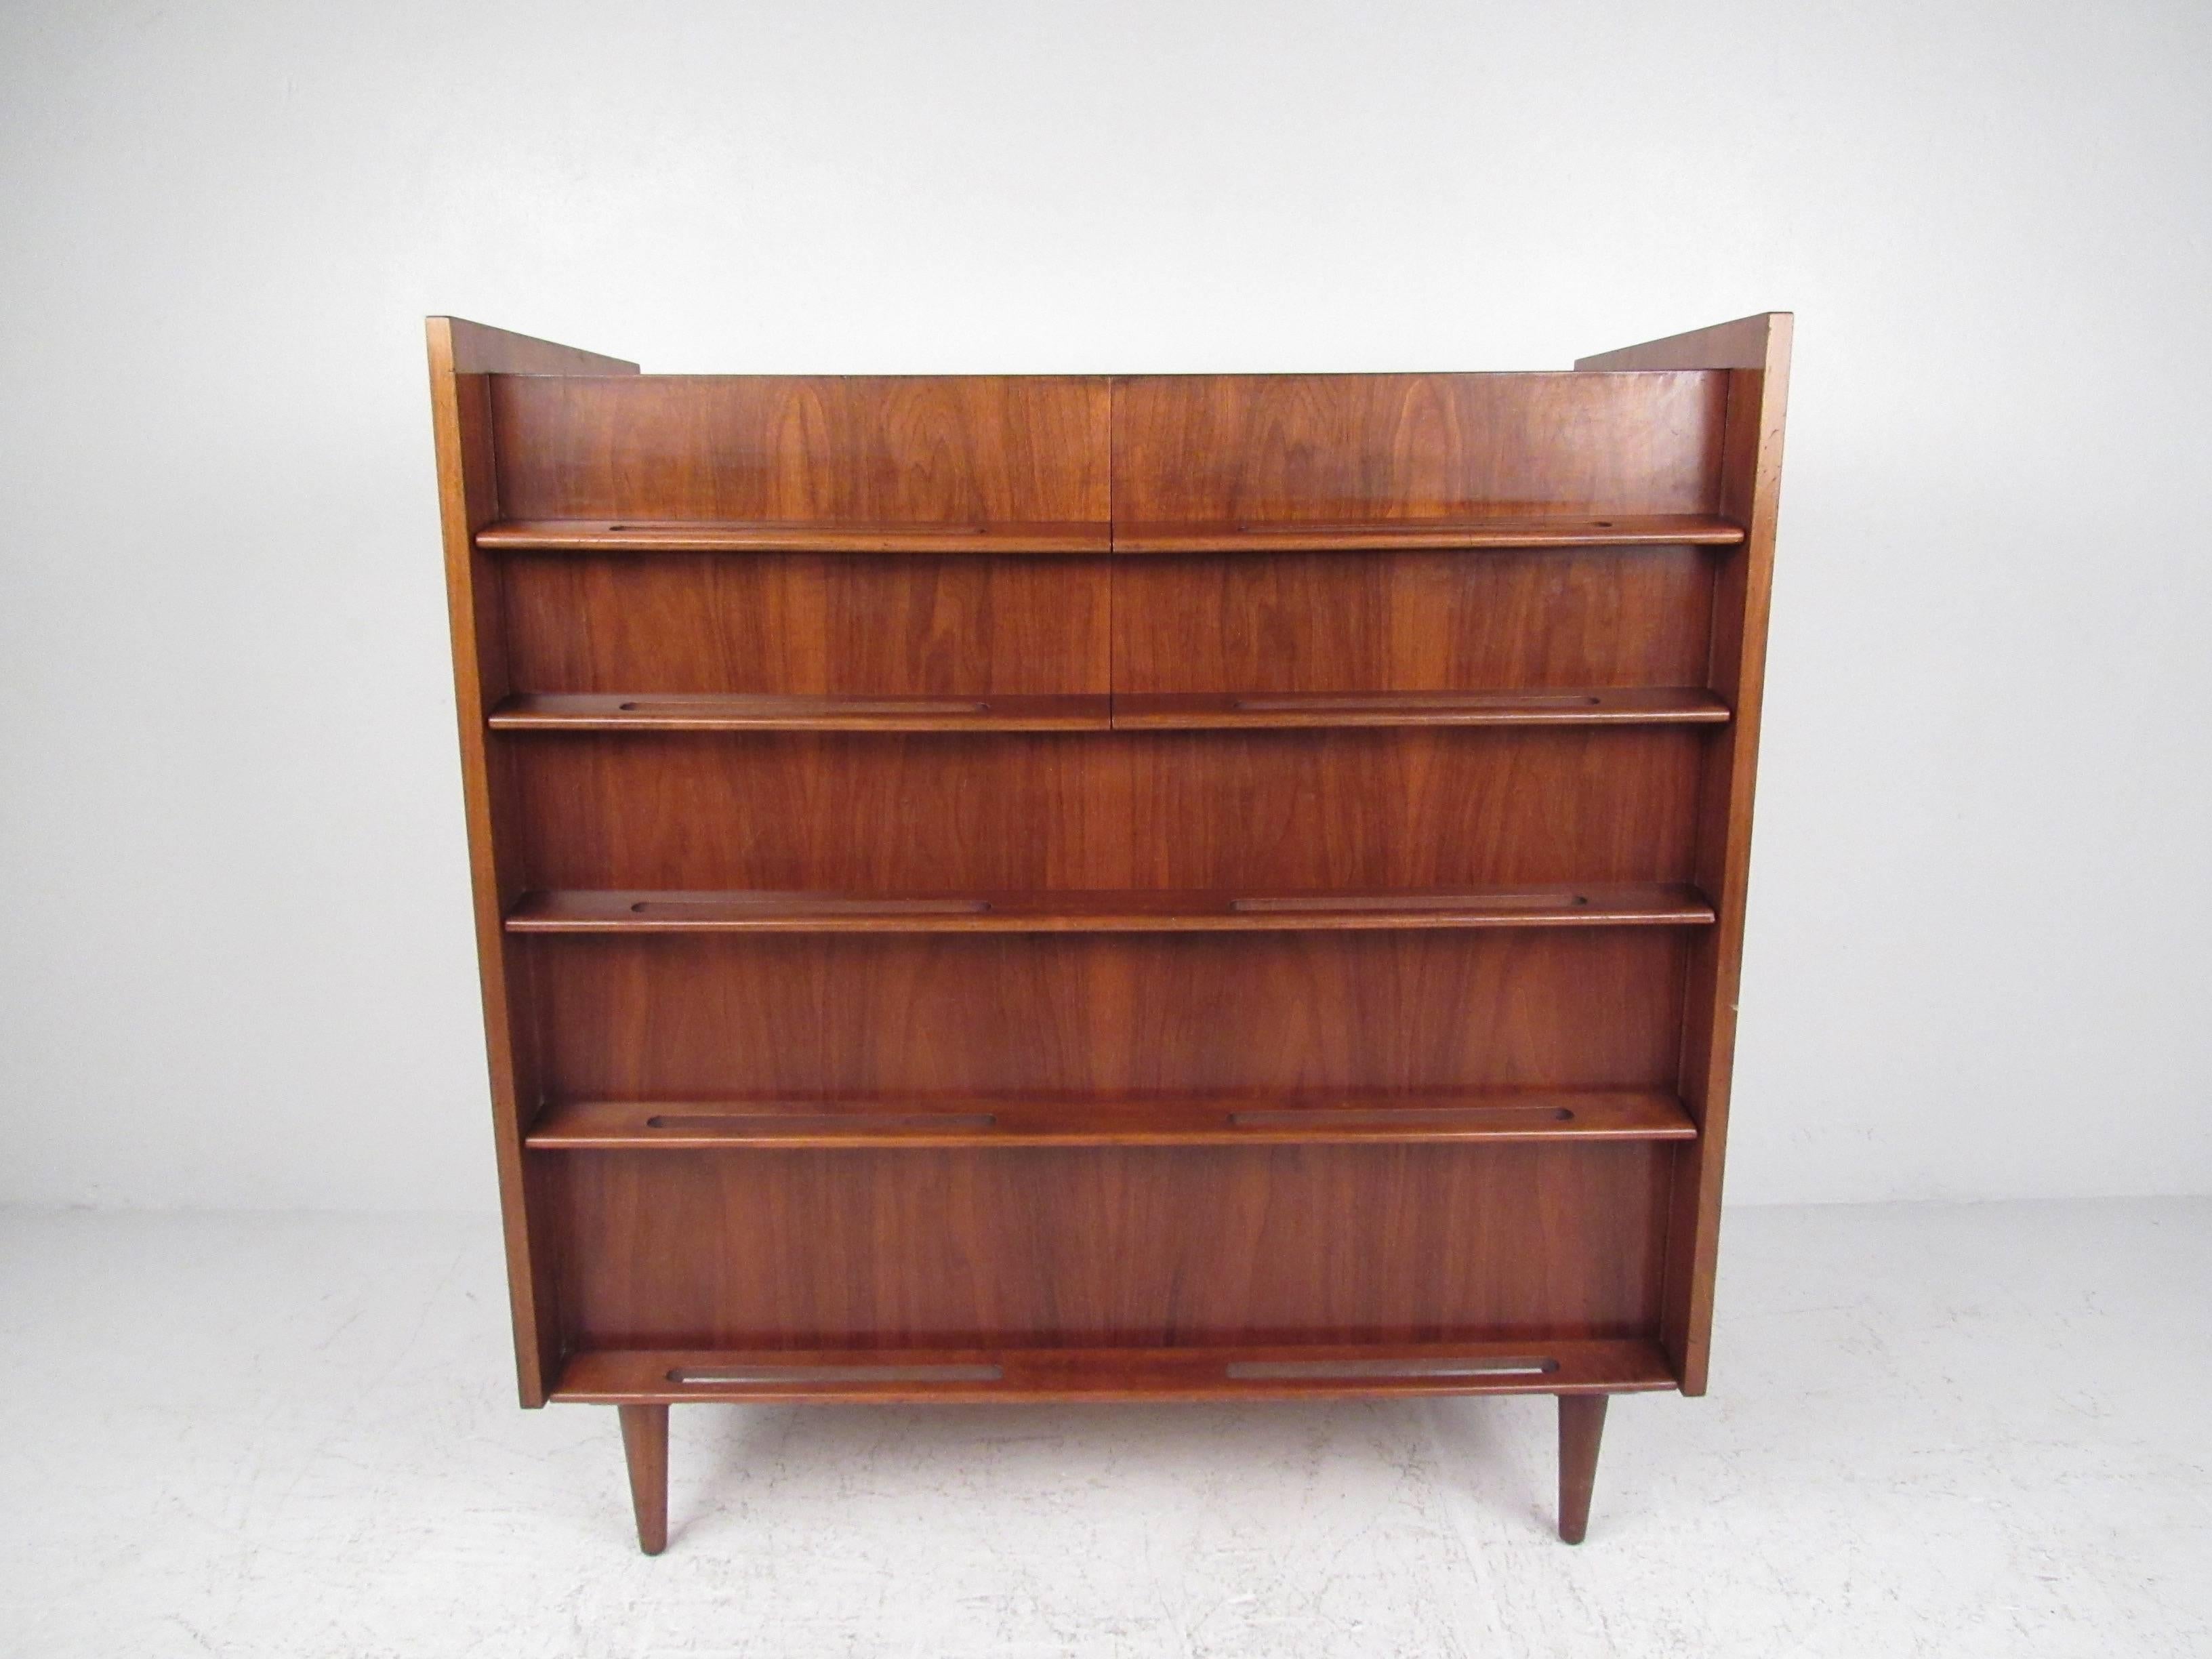 This Mid-Century bedroom set by Edmond Spence features beautiful vintage teak construction and includes a long low dresser, matching highboy, pair of nightstands, and king-size headboard. The stylish carved handles and raised edges make this iconic